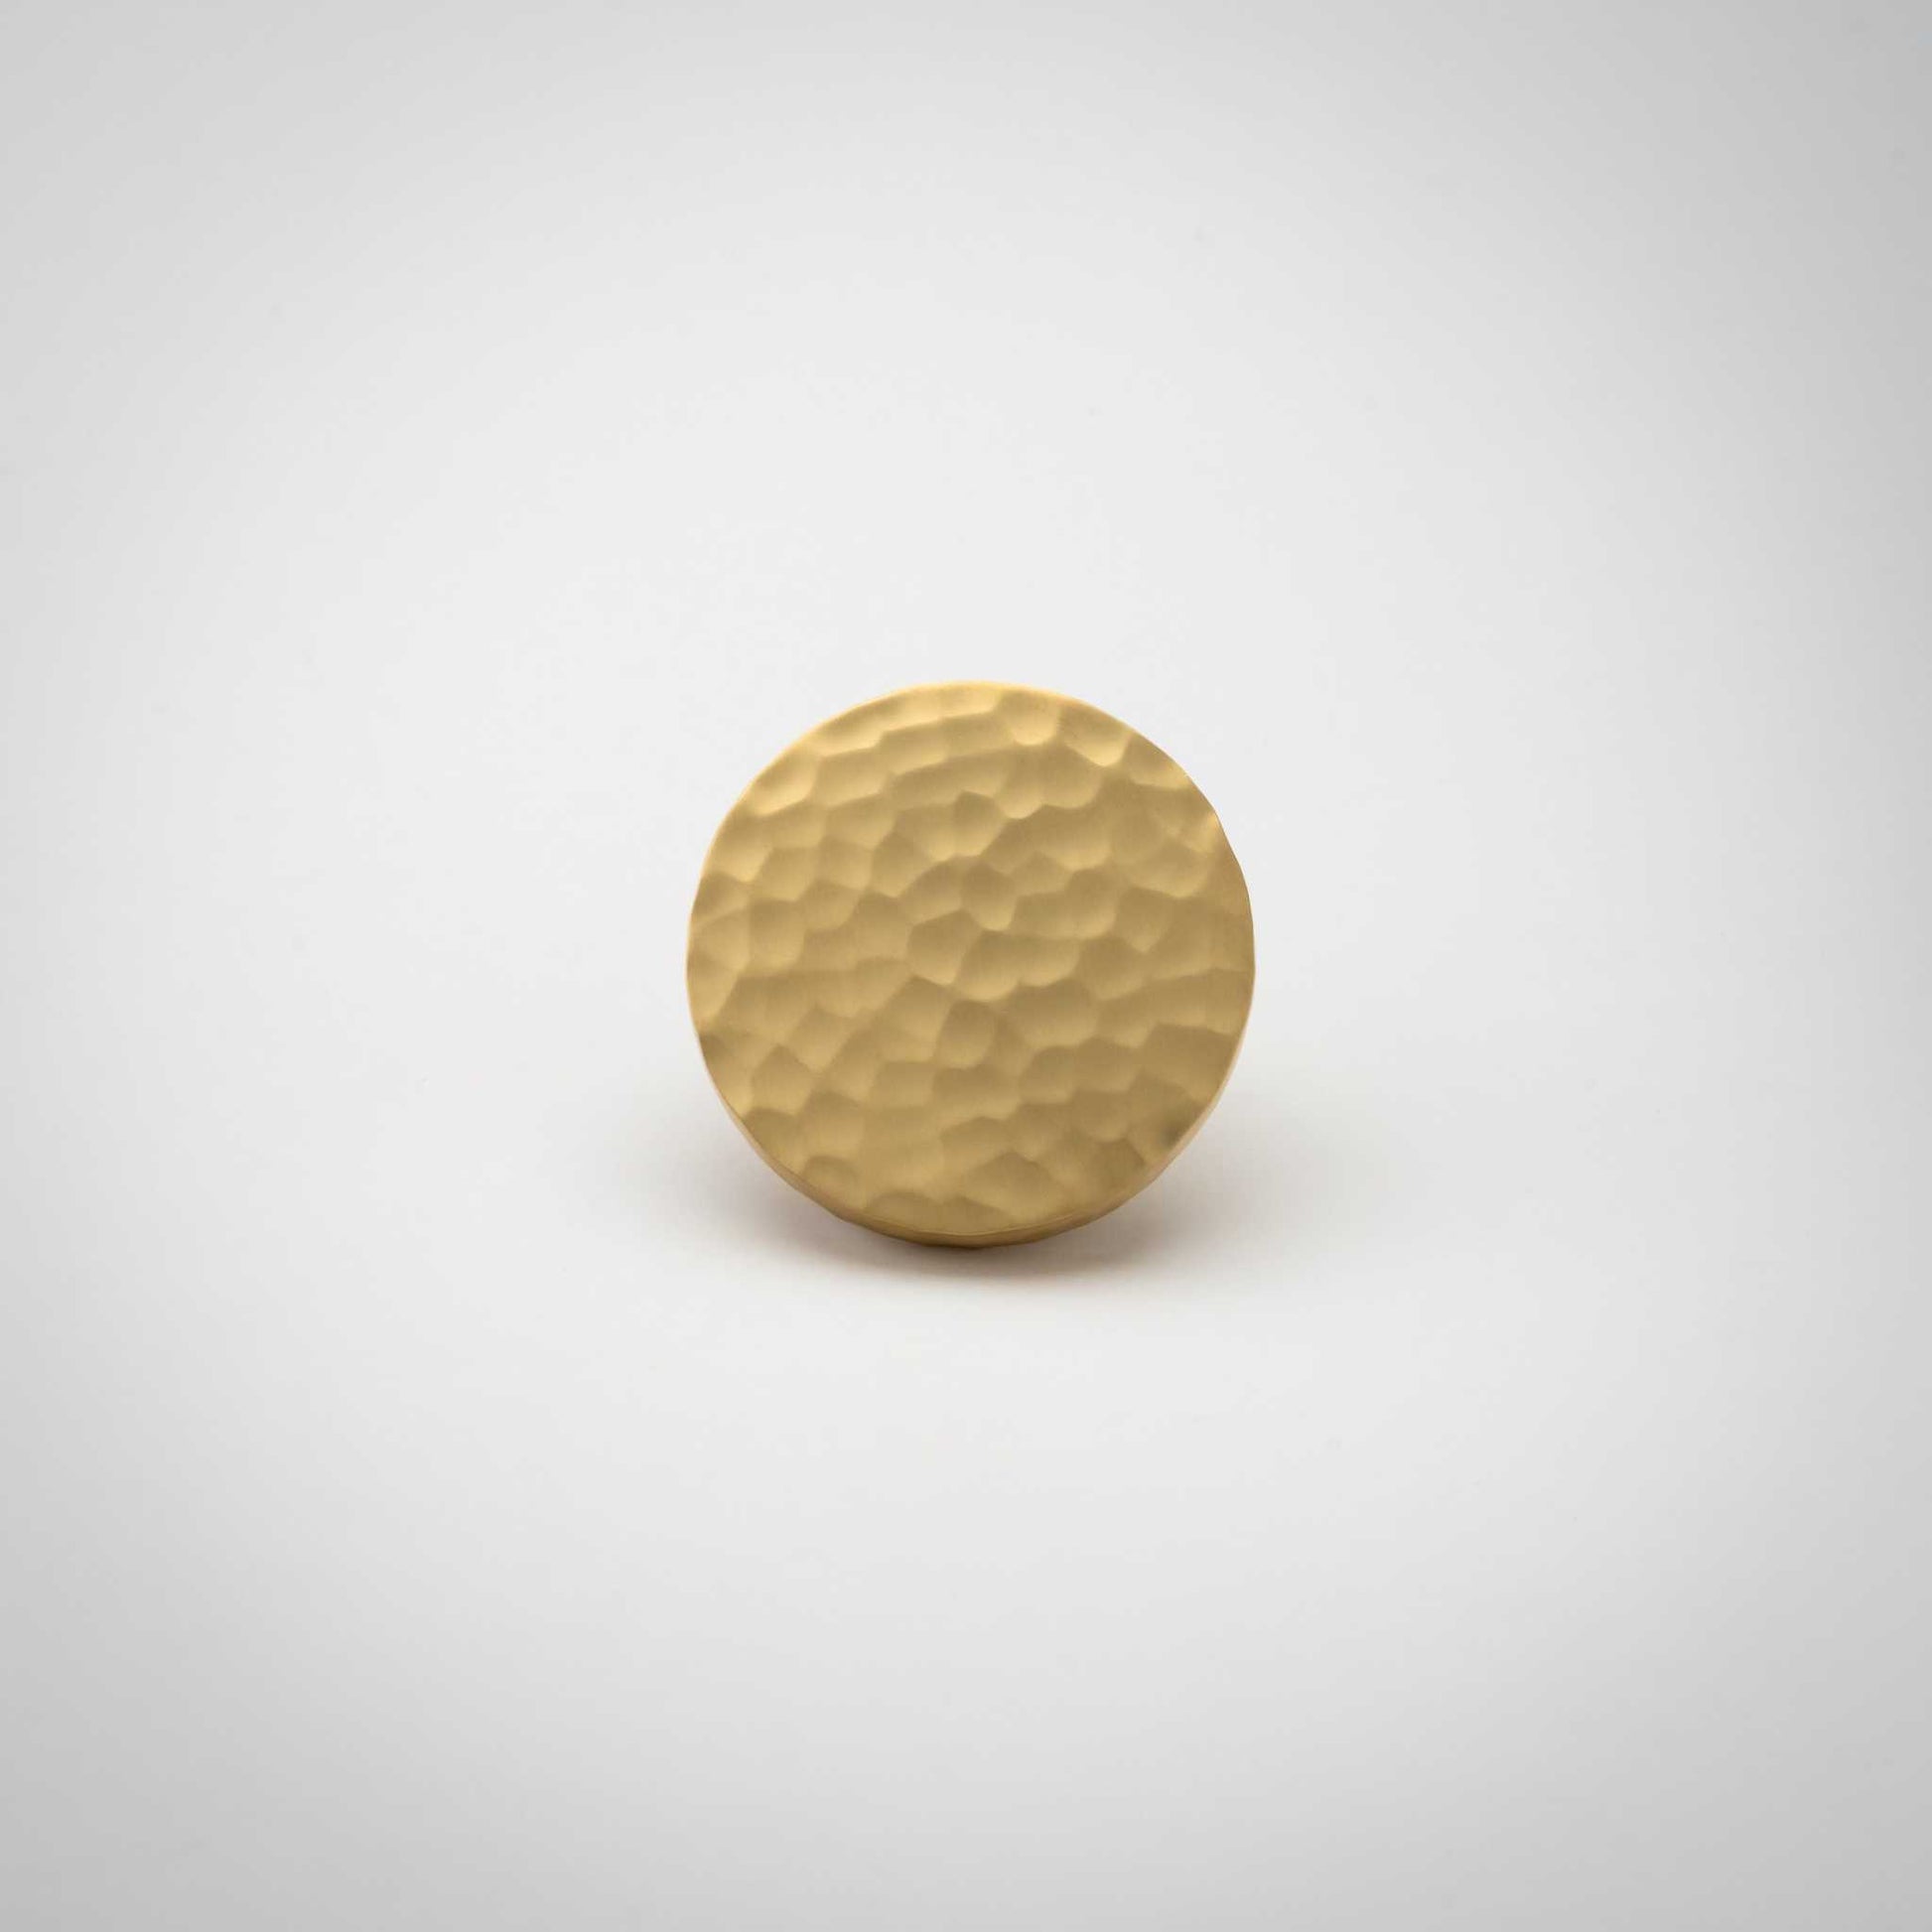 Strike, Hammered Solid Brass Cabinet KnobsOur Strike knob is hand-hammered for a stylish twist on the traditional cabinet knob. Provides a subtle sparkle to your transitional cabinet doors and drawers.KnobStrike, Solid Brass Hammered Cabinet Knobs